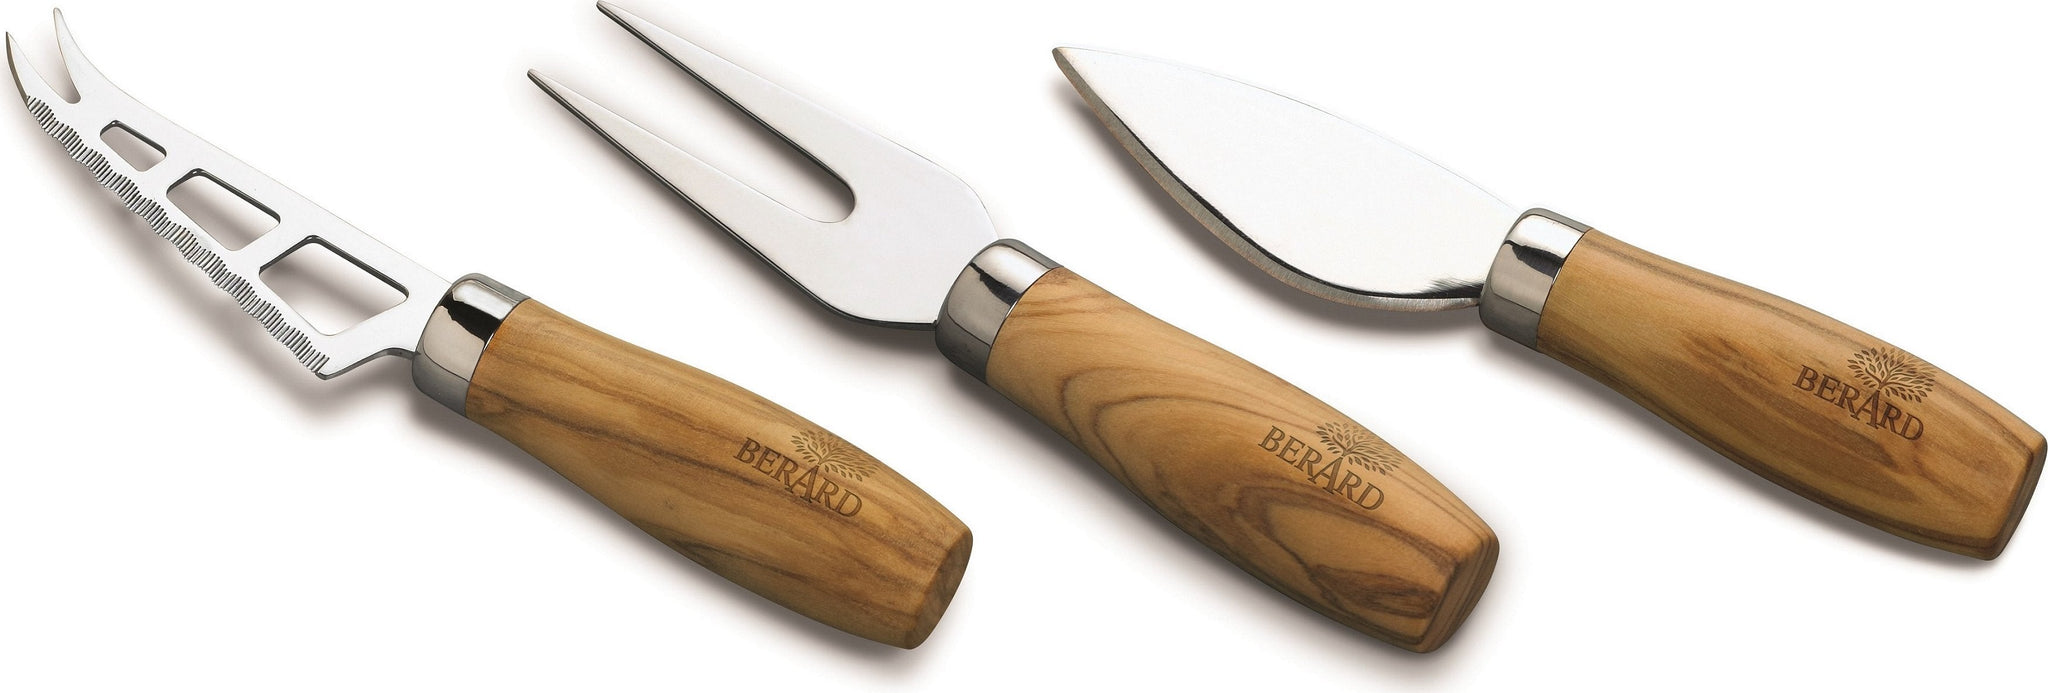 Berard - Stainless Steel Olivewood Handle Cheese Knife, 3 PC Set - 21350